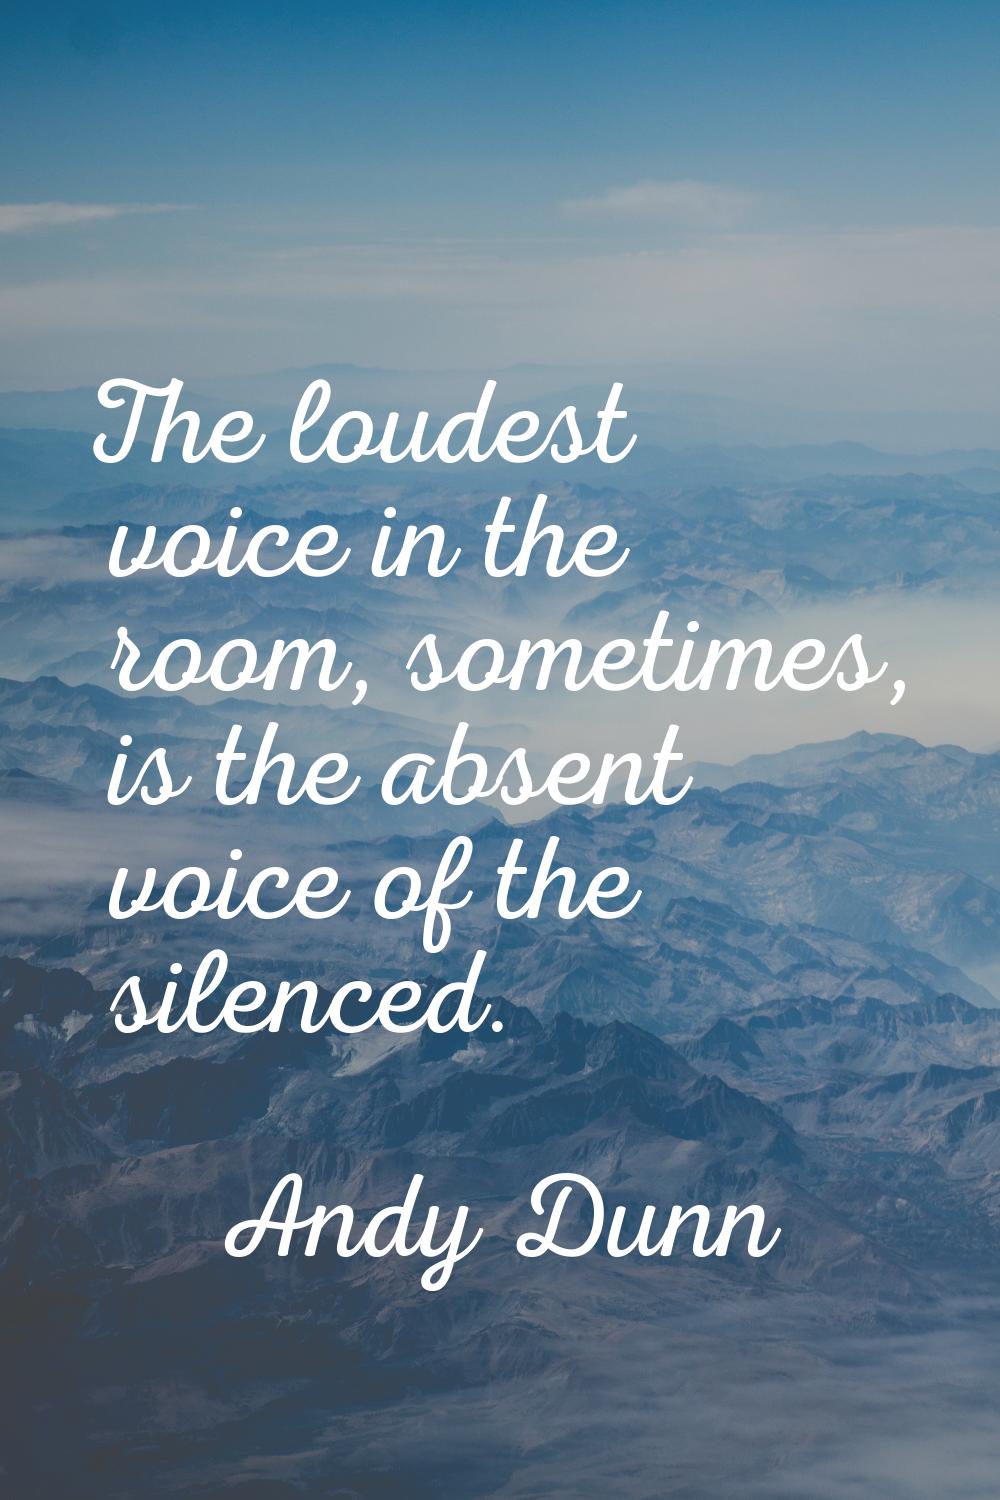 The loudest voice in the room, sometimes, is the absent voice of the silenced.